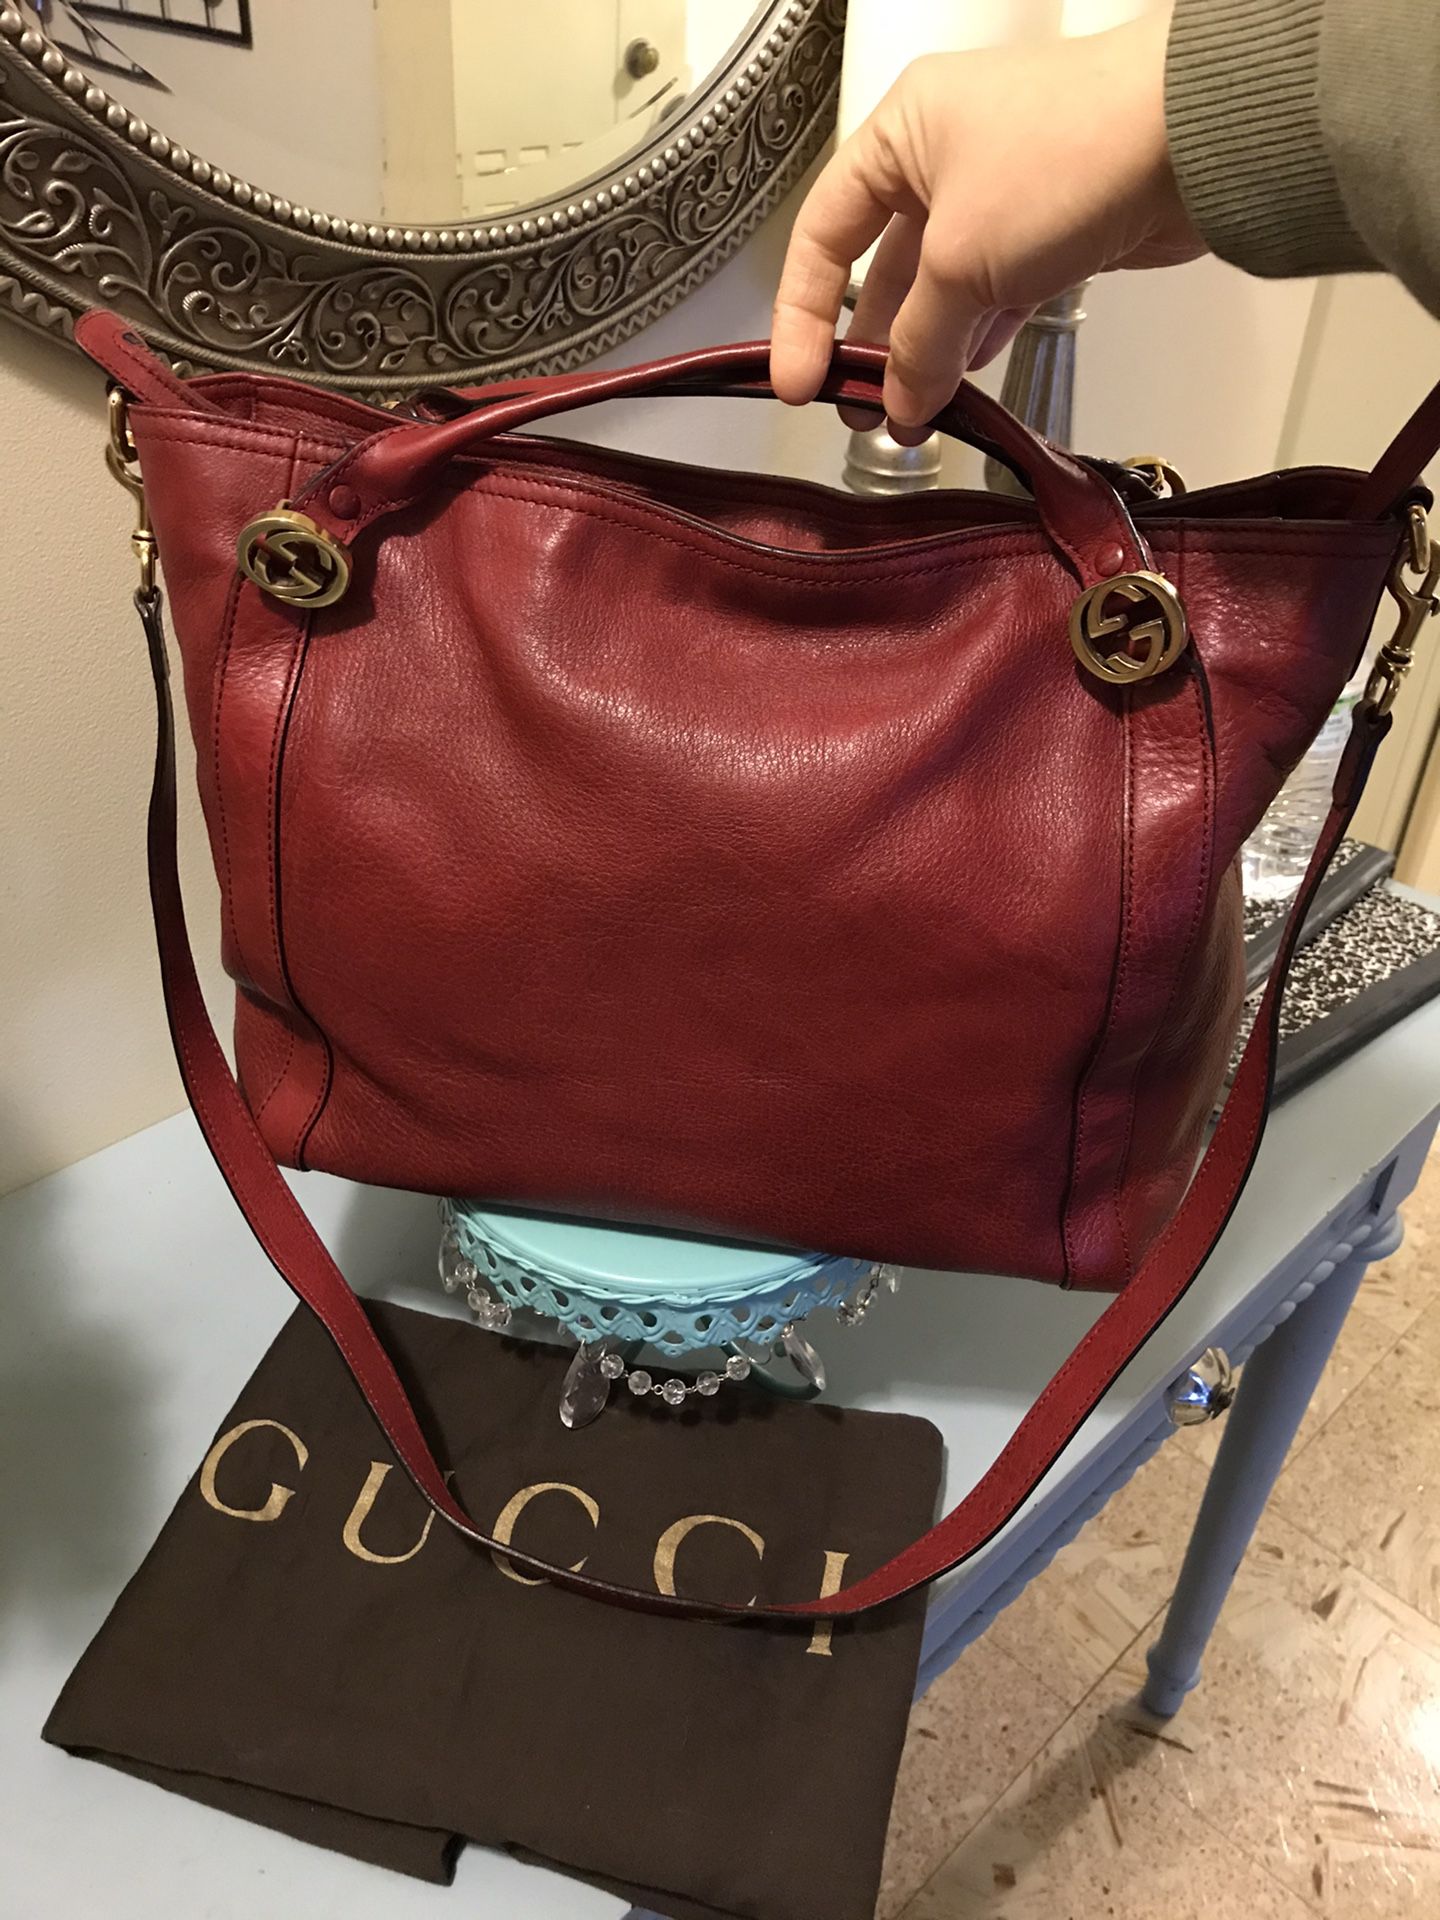 Authentic Gucci GG tote bag in great condition